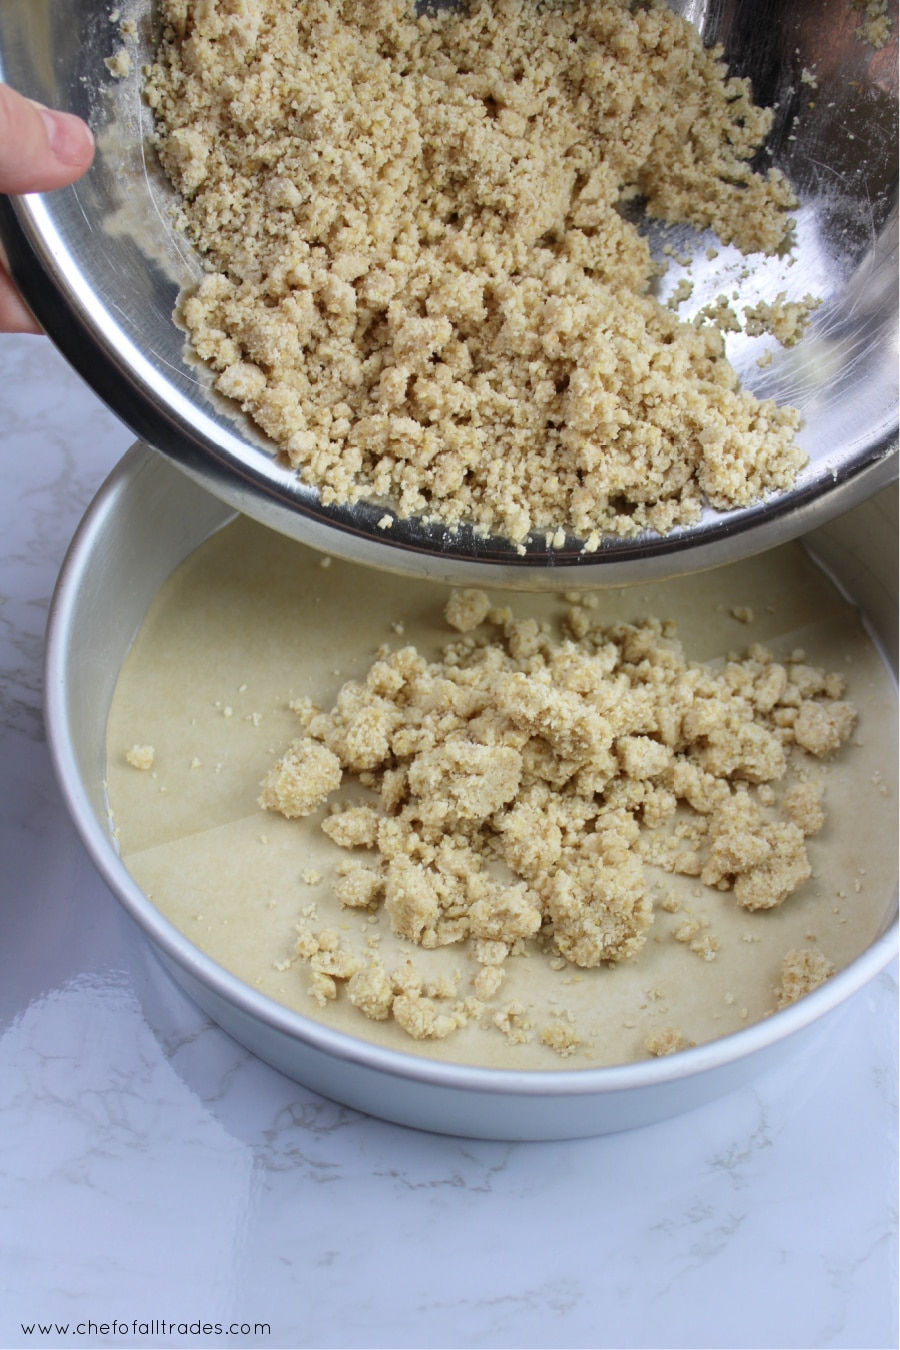 all crust ingredients mixed together in a silver bowl being poured into the cake pan